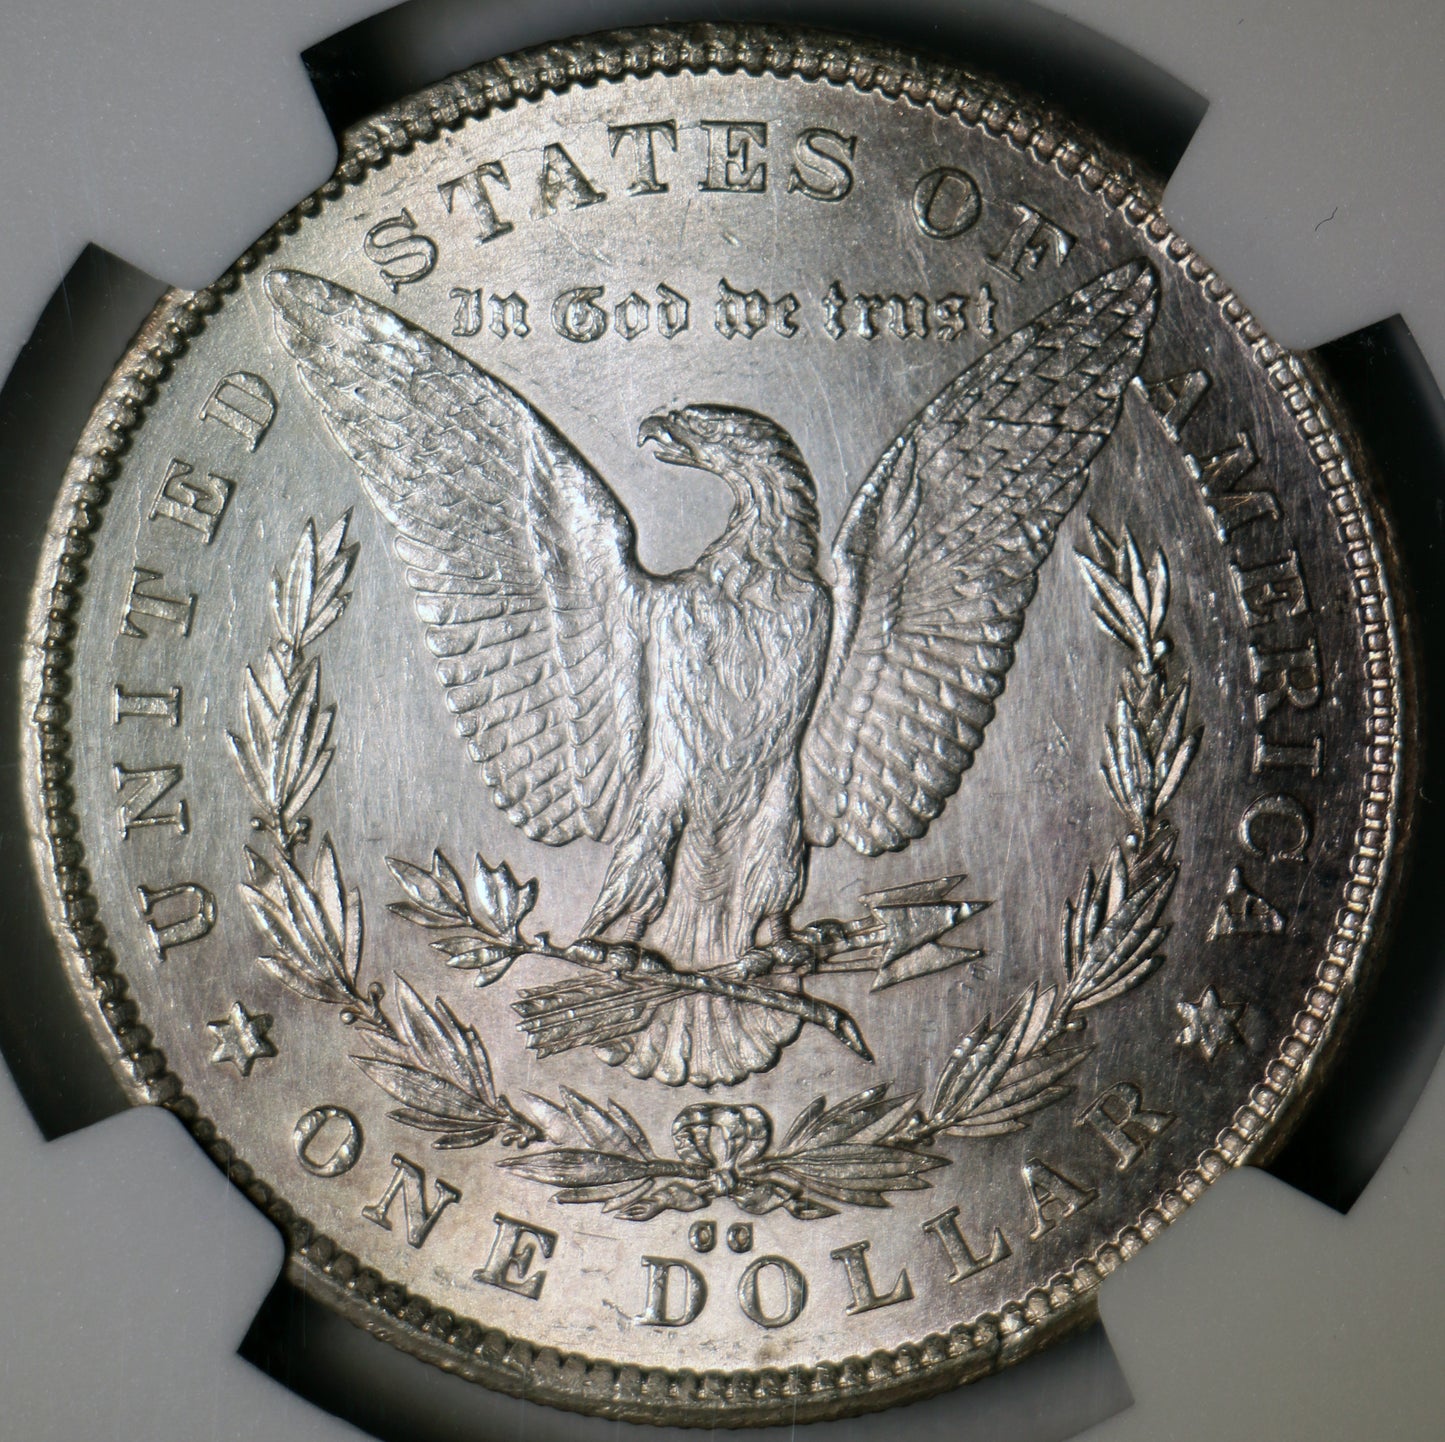 1878-CC NGC UNC Details Harshly Cleaned Morgan Silver Dollar Carson City